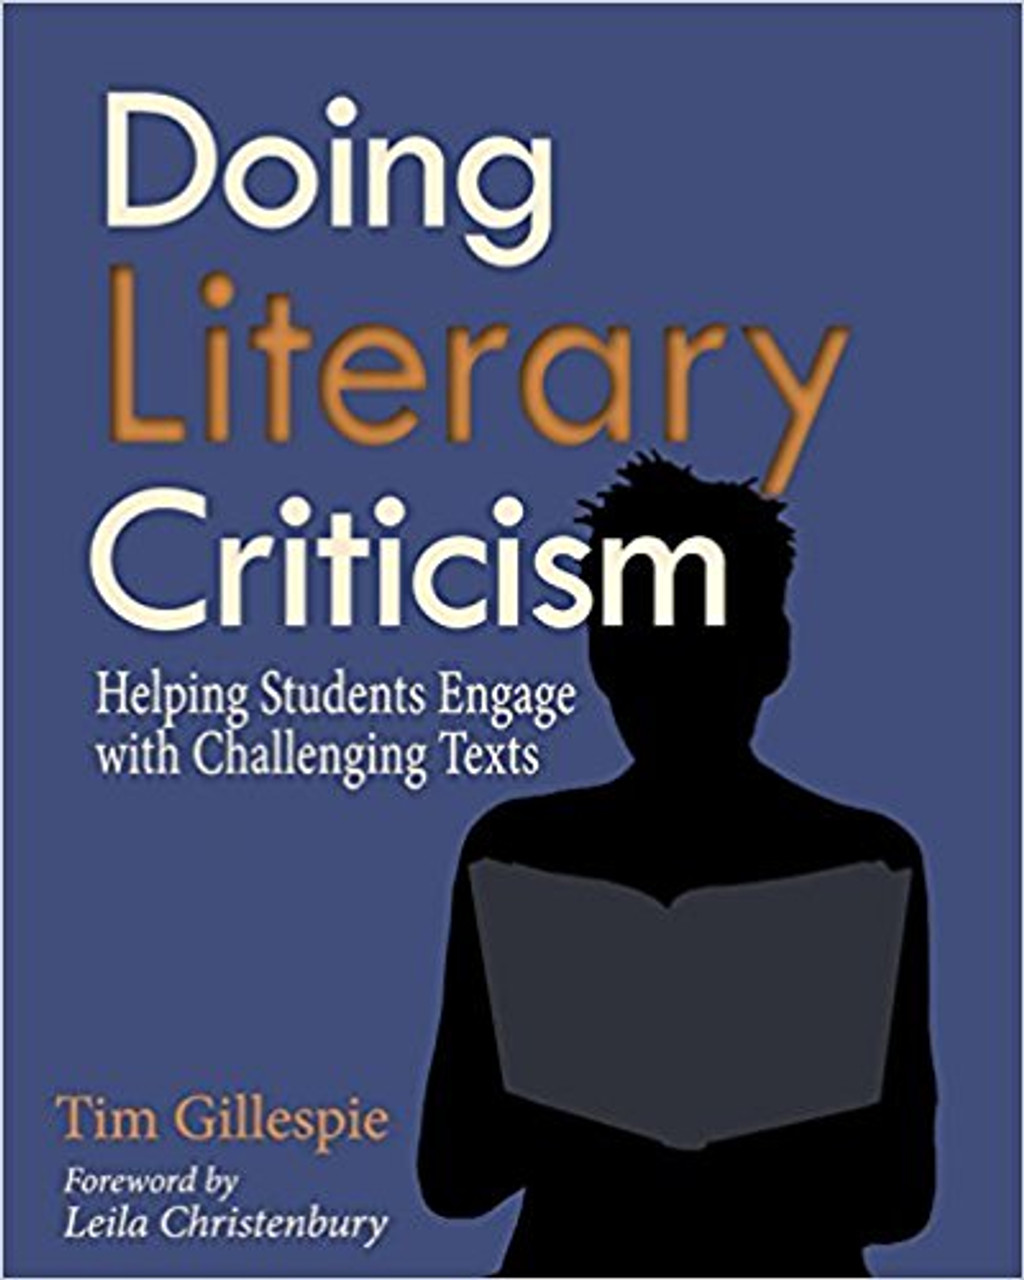 Doing Literary Criticism: Helping Students Engage with Challenging Texts [With CDROM by Tim Gillespie